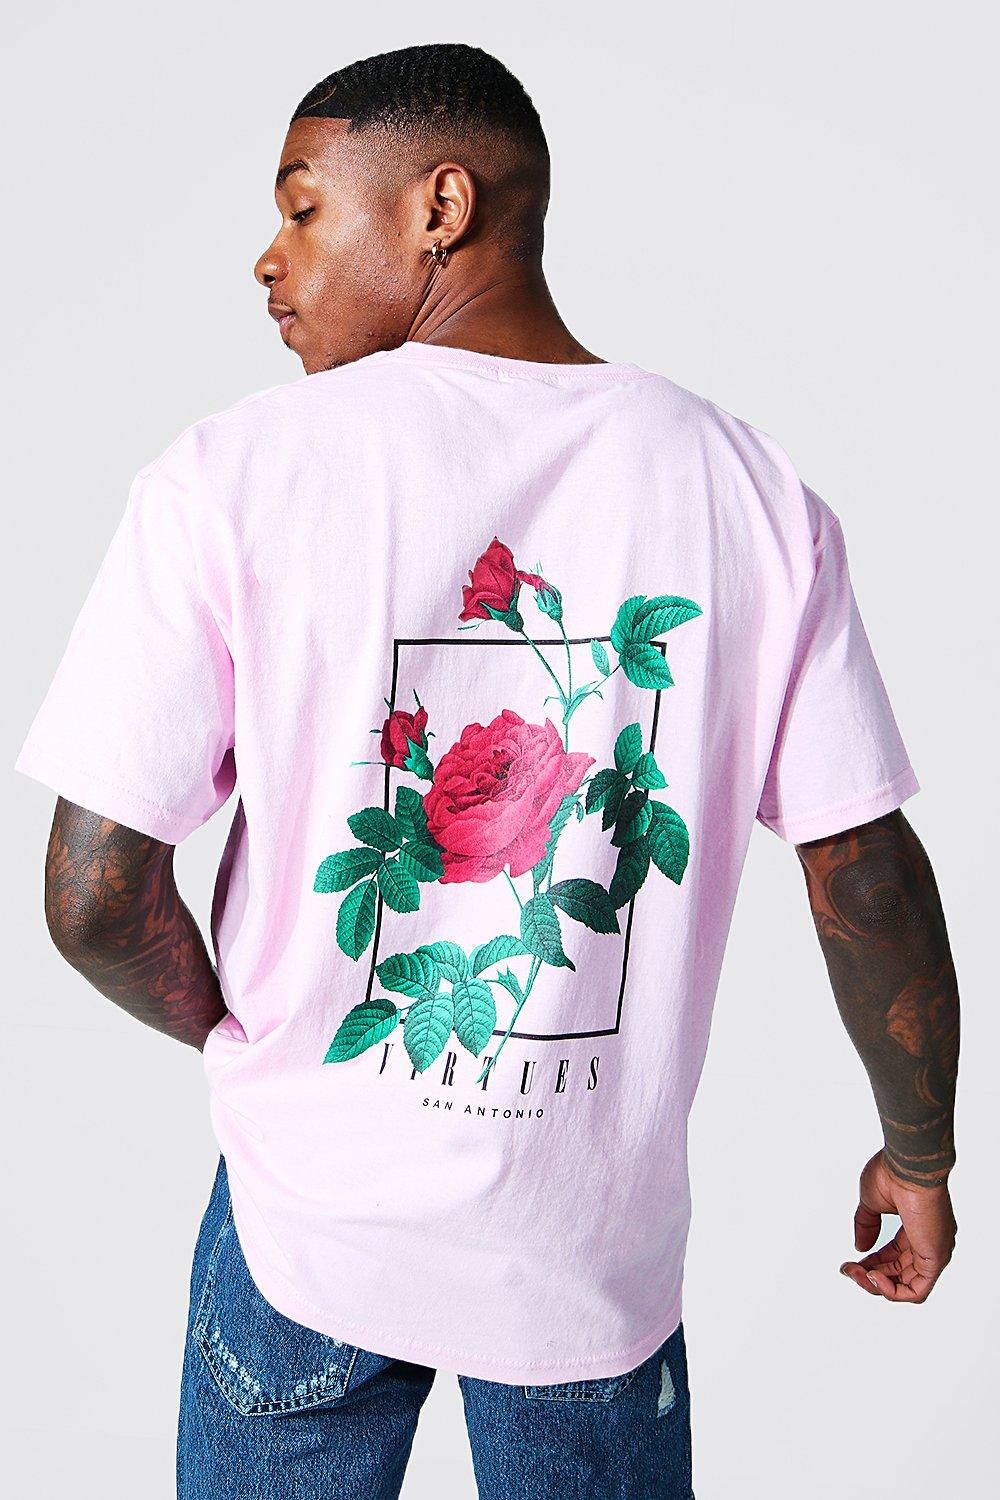 boohooMAN Plus Size Oversized Rose Back Graphic T-Shirt